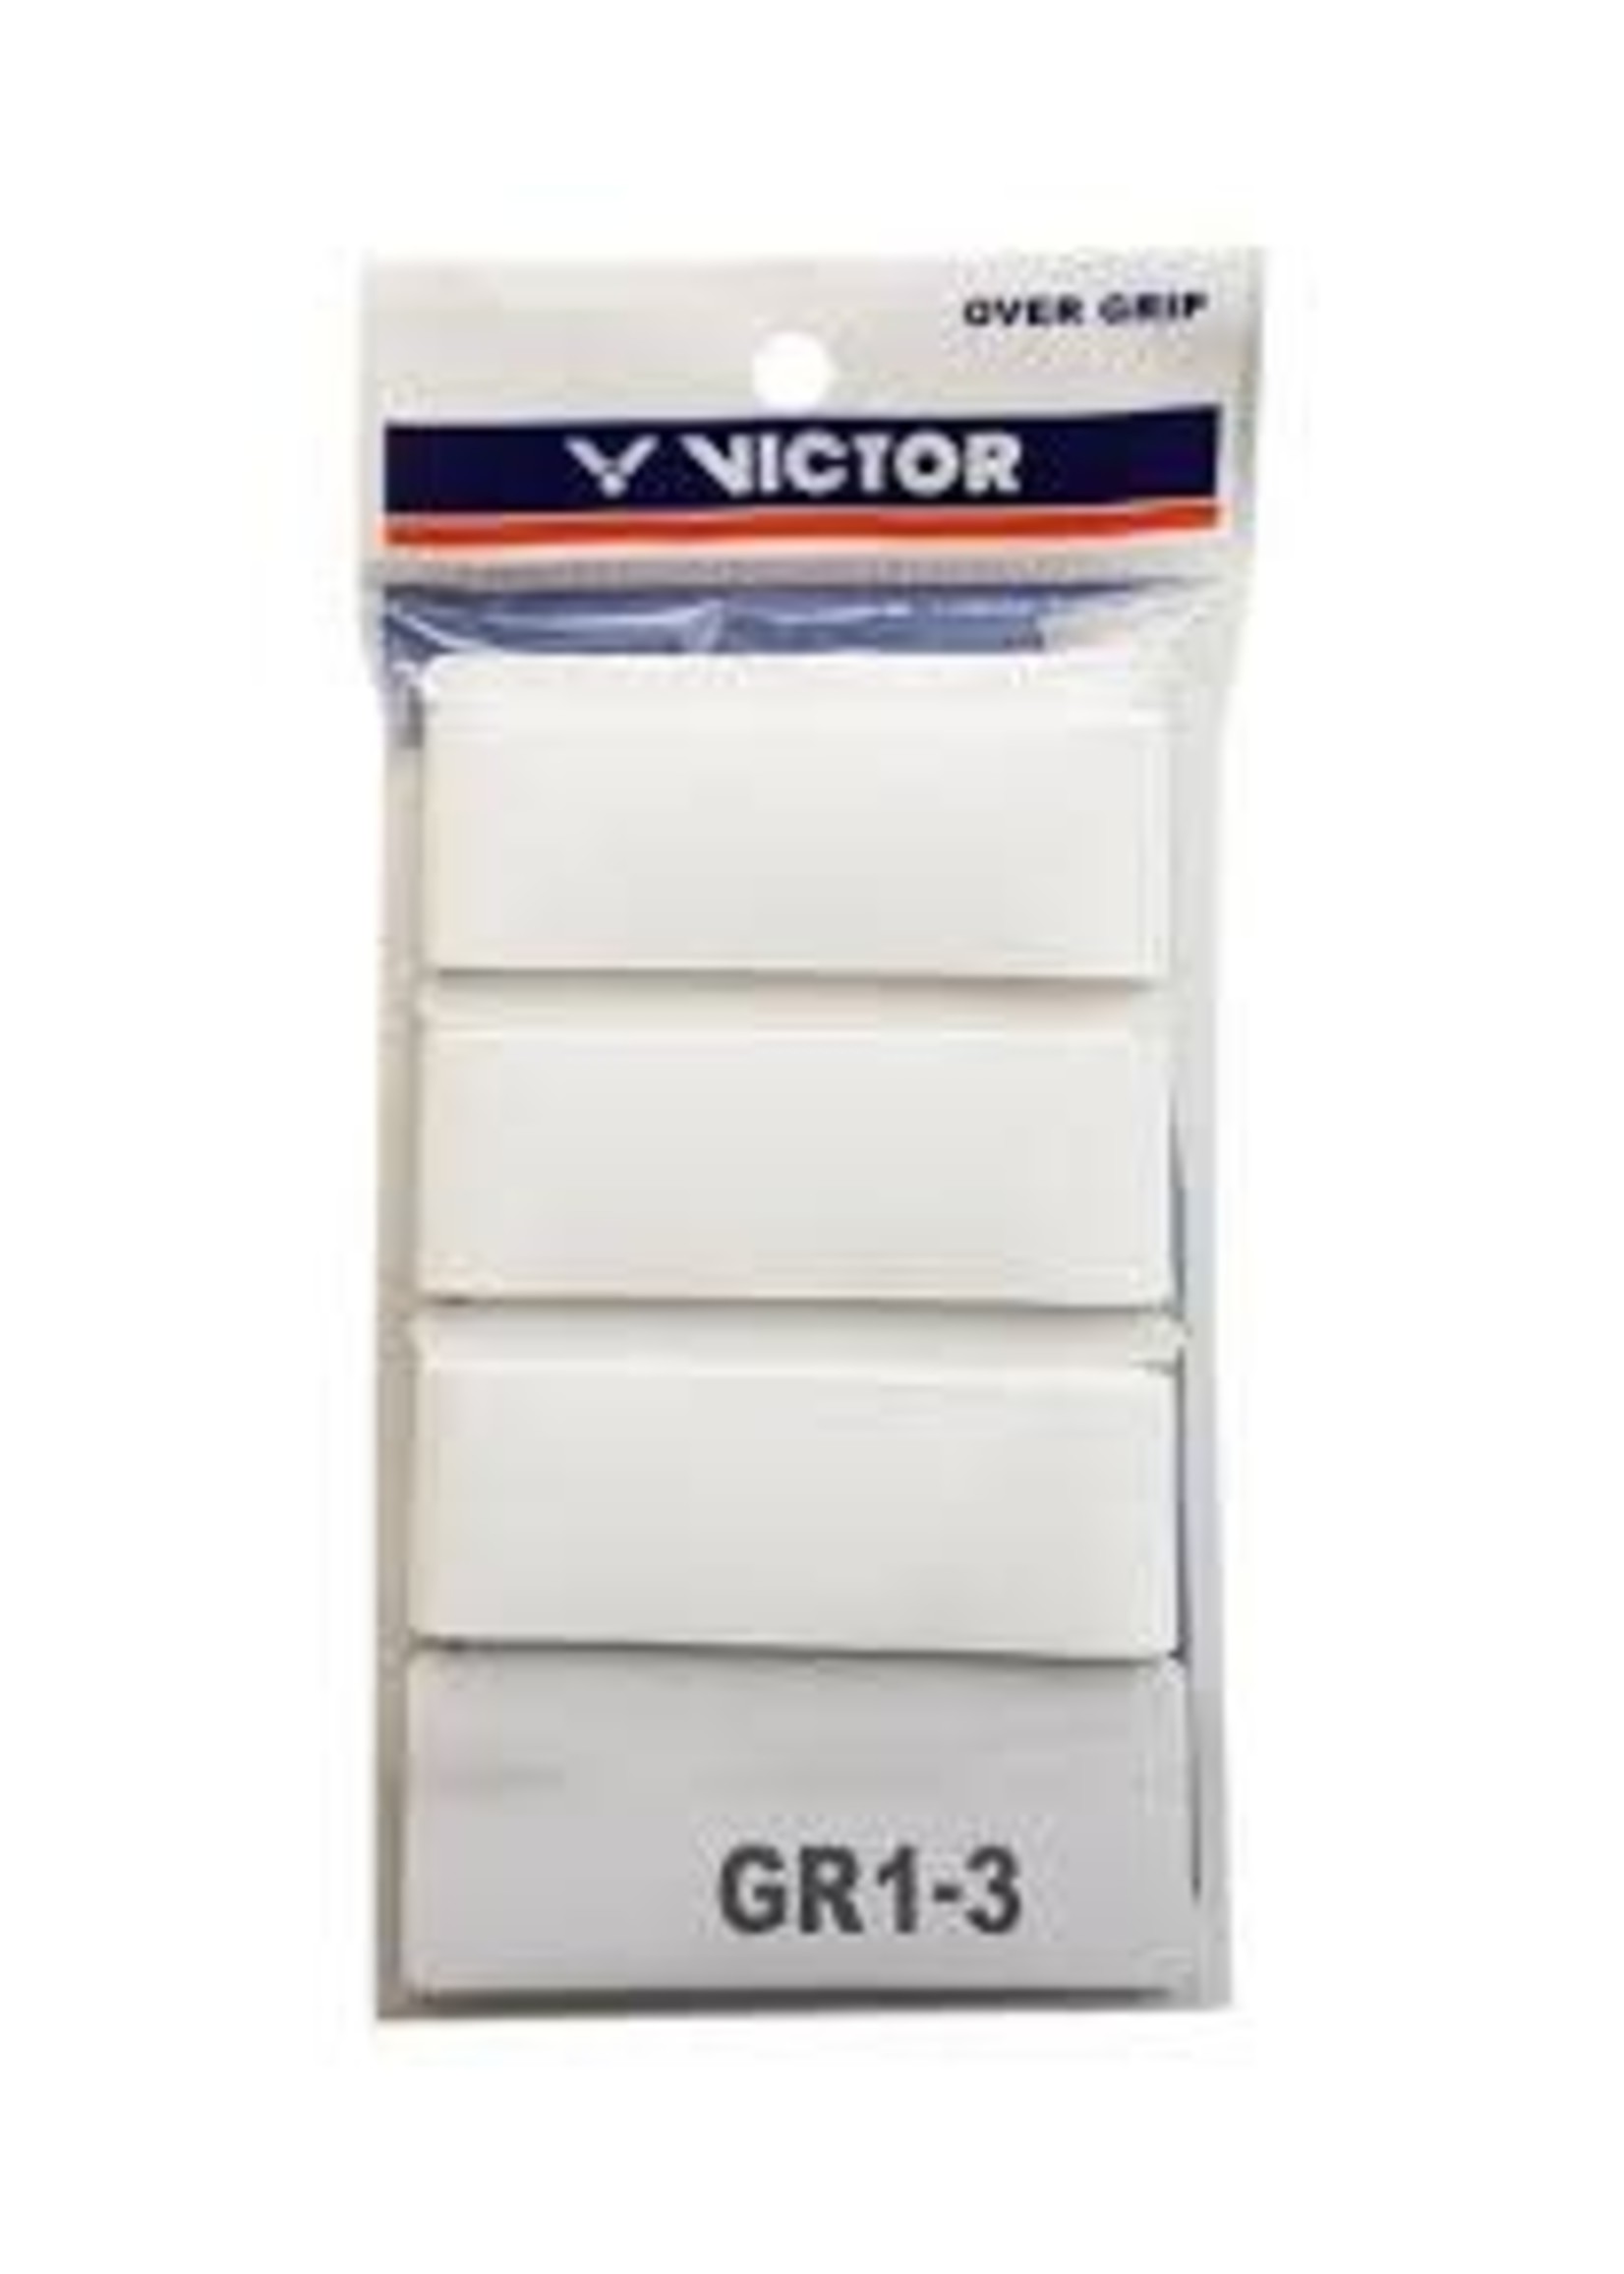 VICTOR VICTOR OVER GRIP